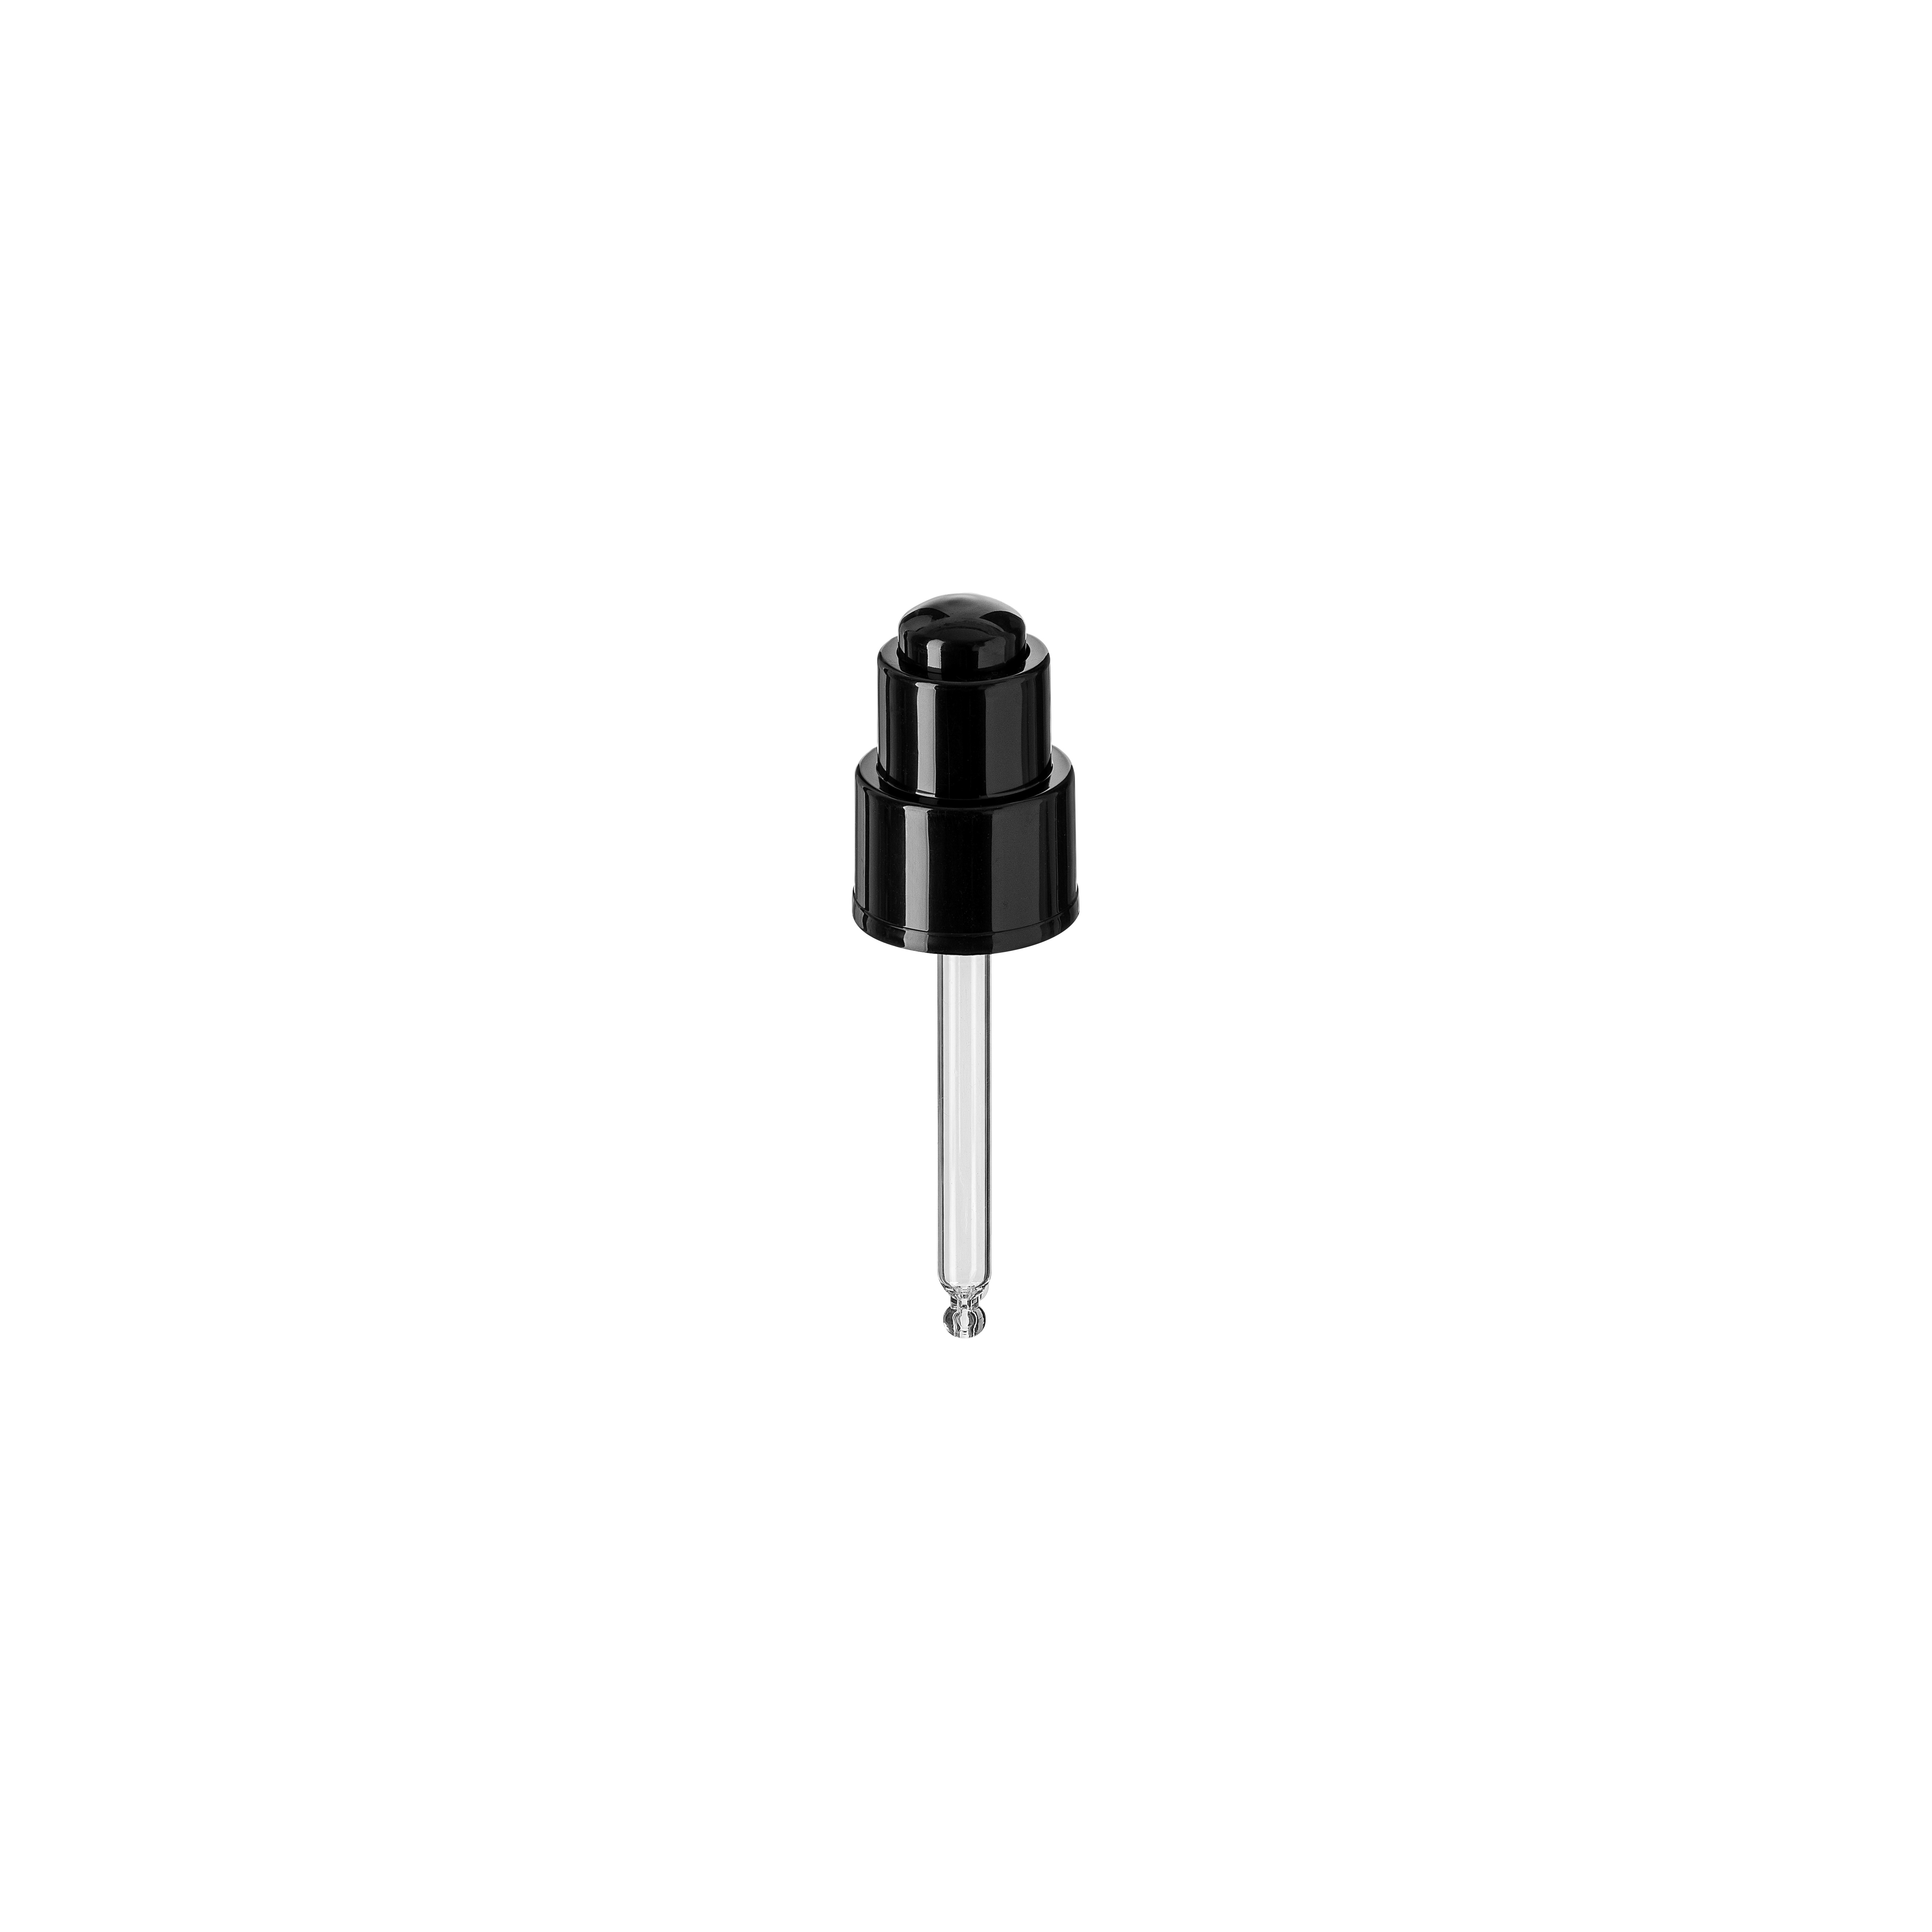 Push-button pipette 24/410, PP/ABS, black glossy finish, black button bulb Nitrile 0.4 ml, ball tip, straight for Laurel 50 ml